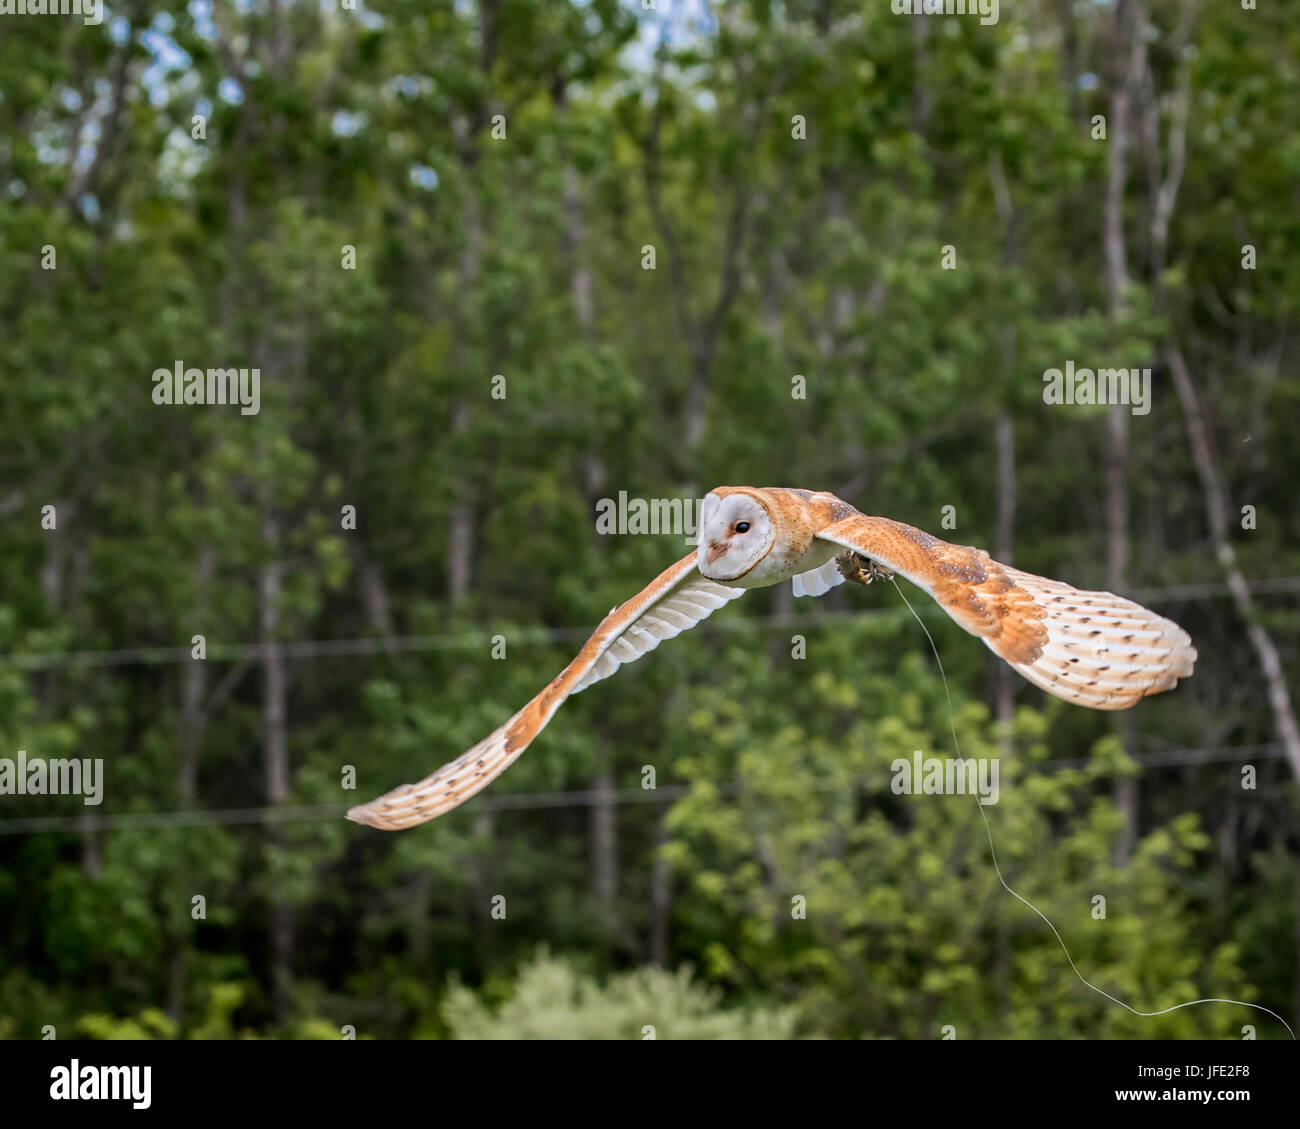 Baby barn owl learning to fly Stock Photo